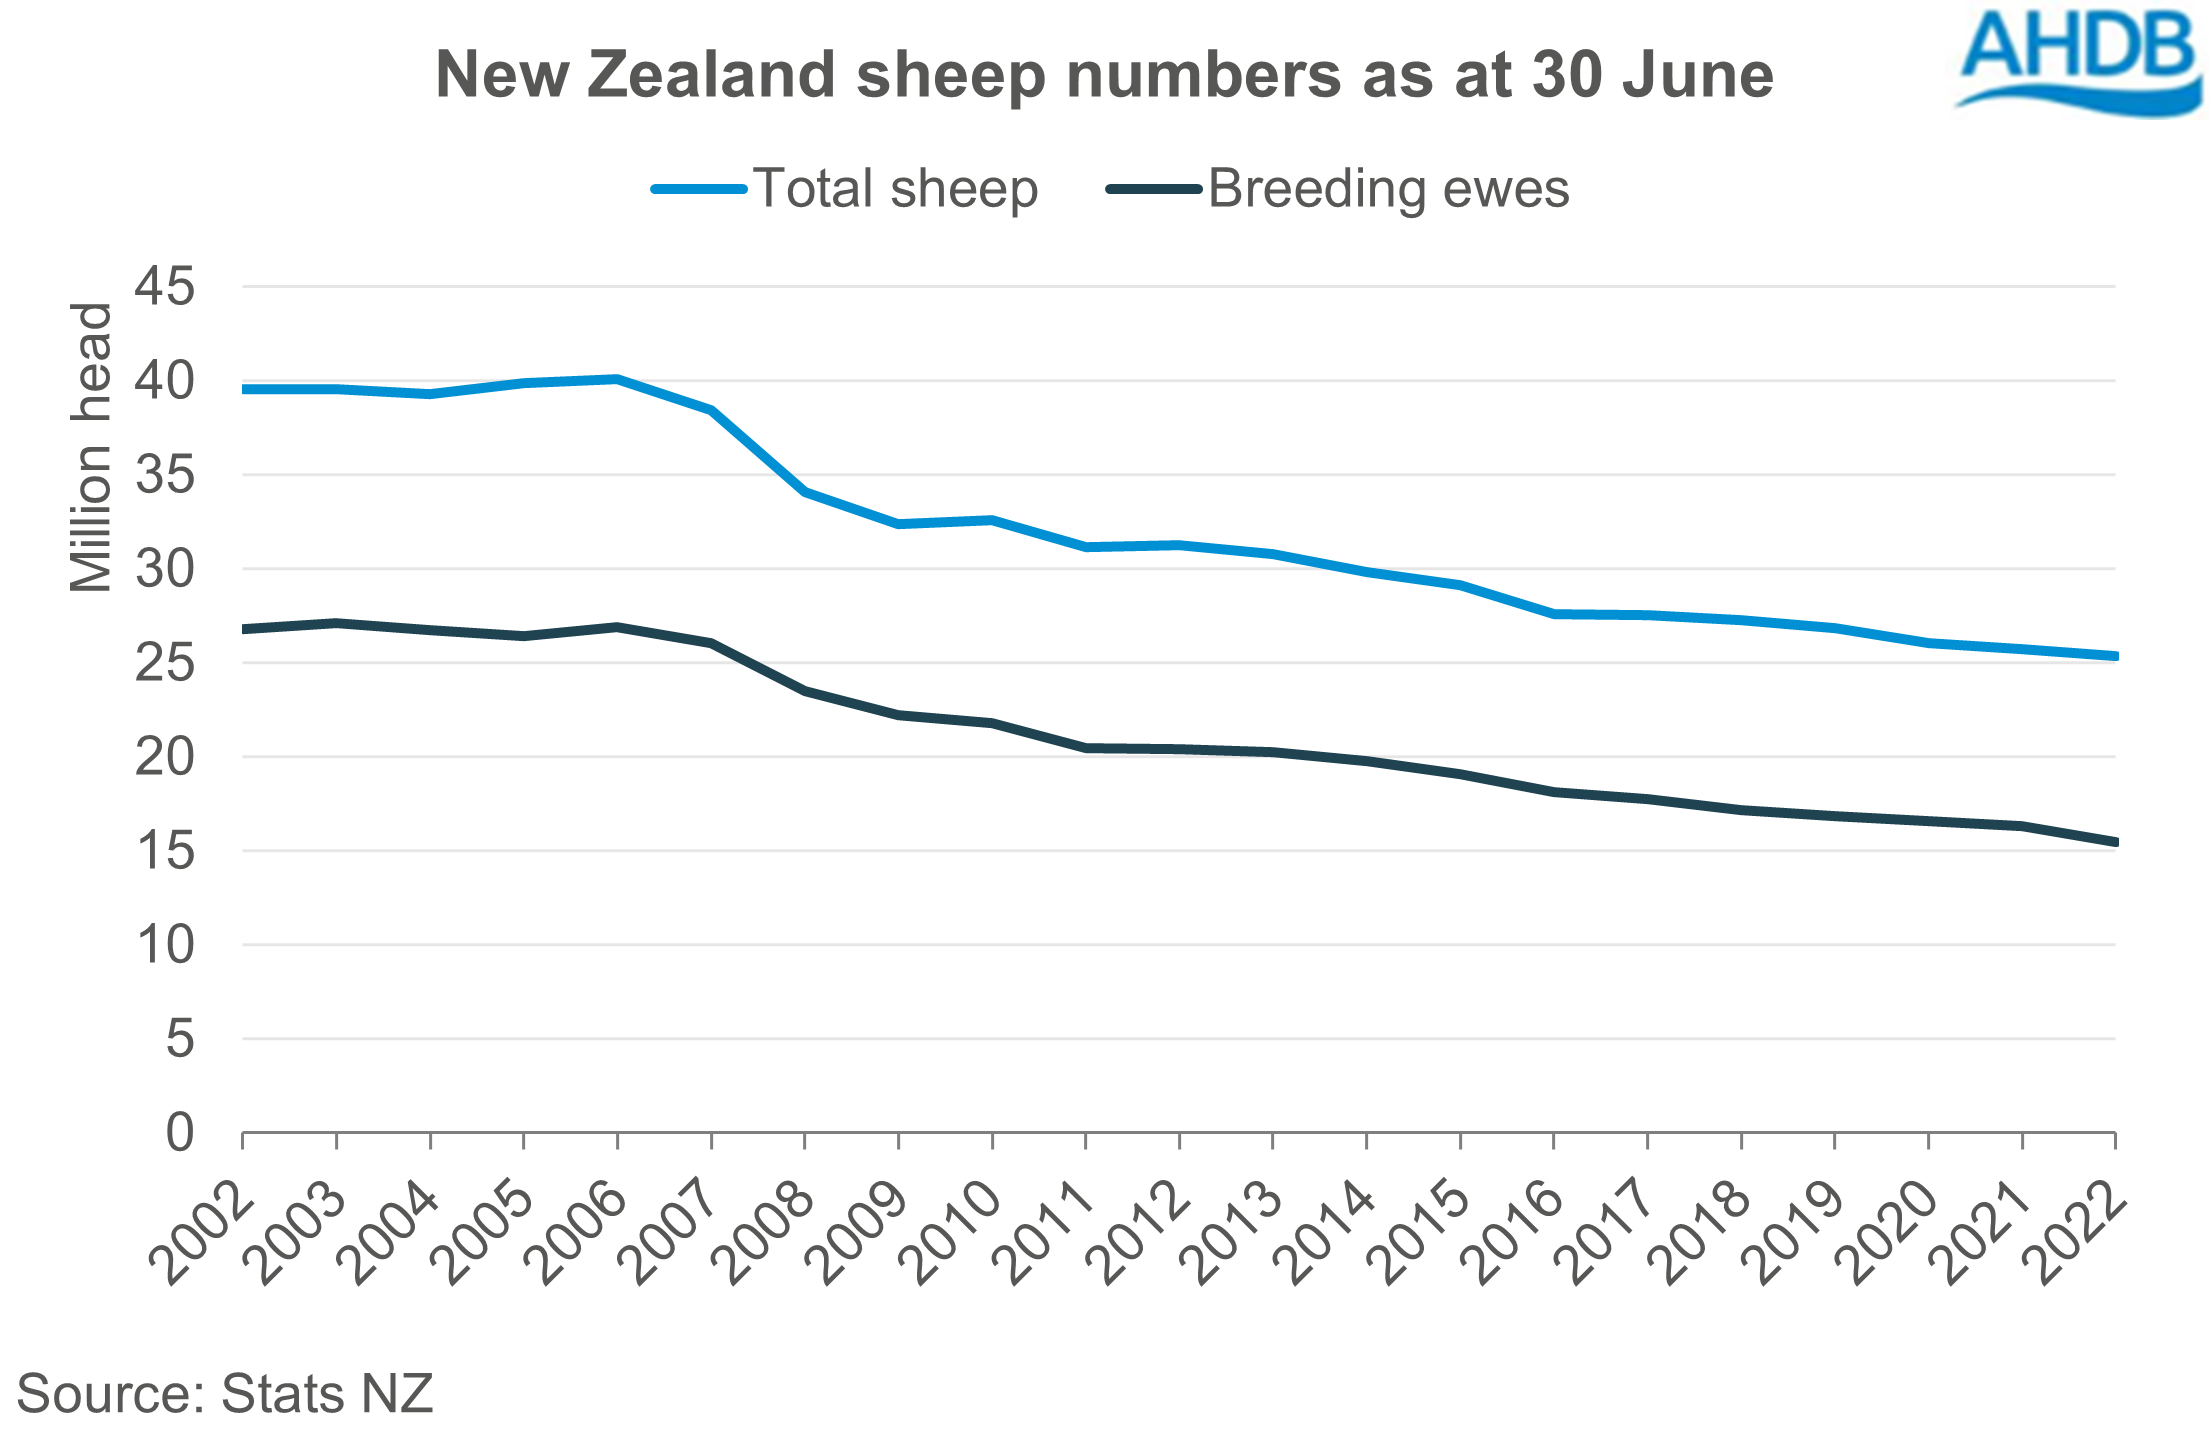 Graph showing number of sheep and breeding ewes in New Zealand from 2002 to 2022